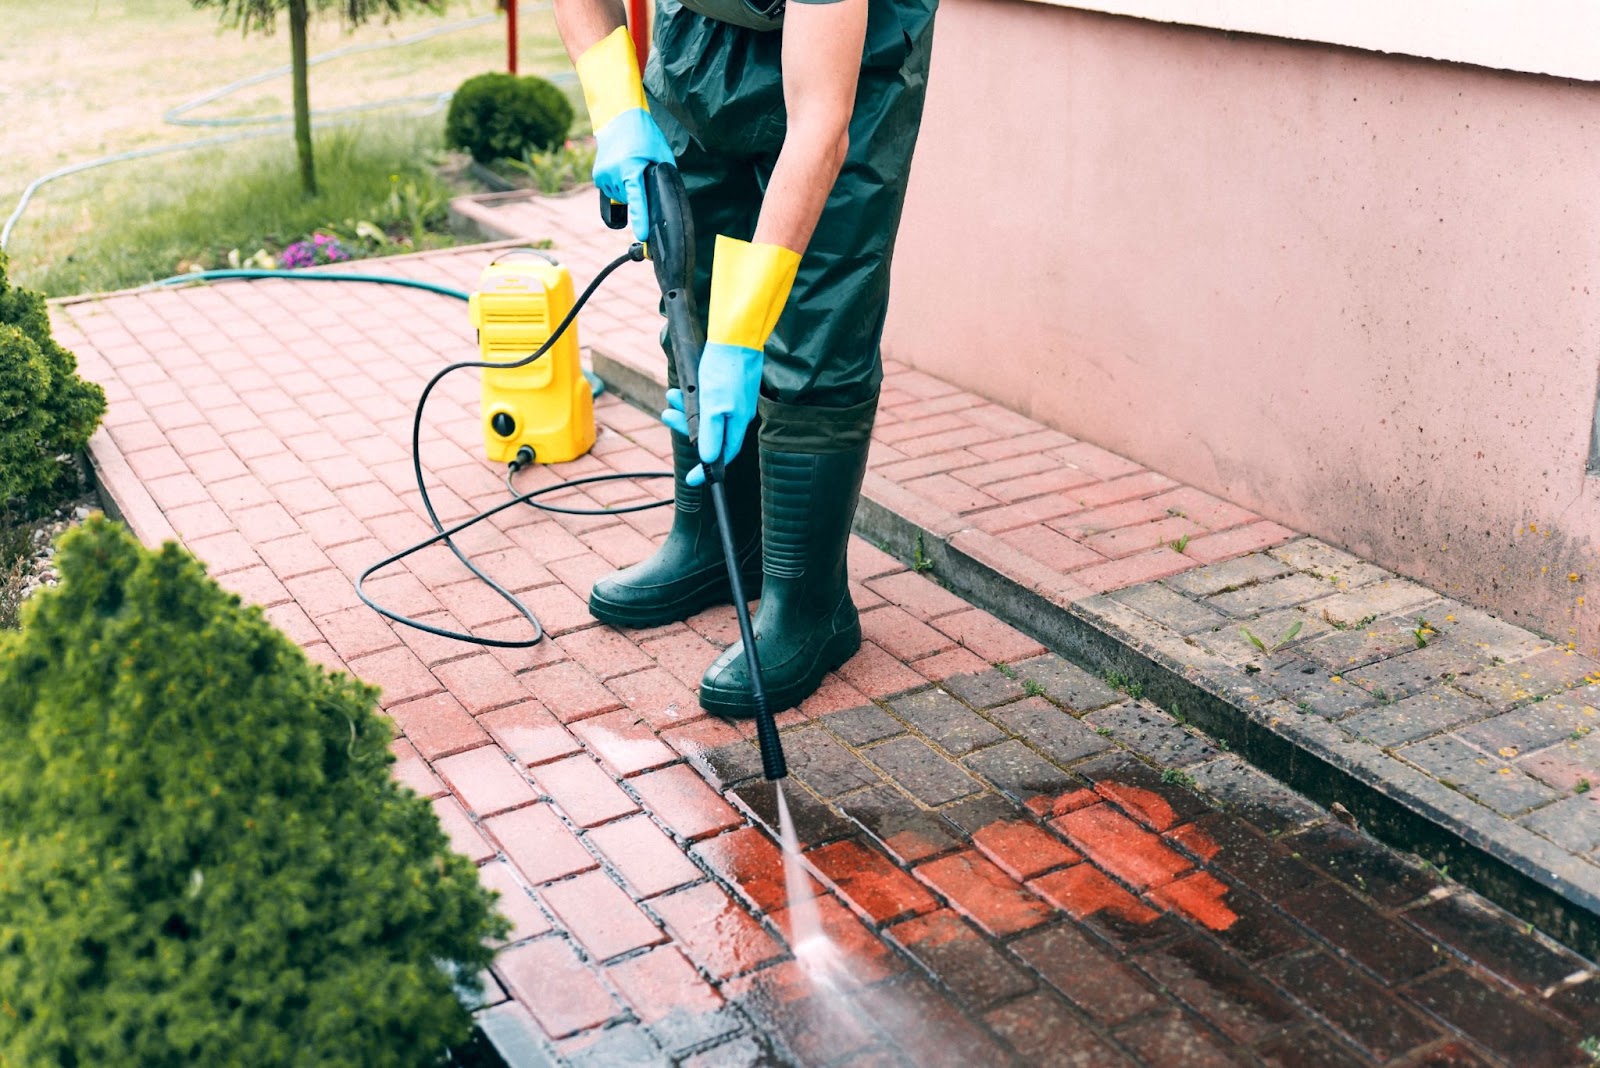 Power washing can help a home look cleaner for oklahoma home buyers 